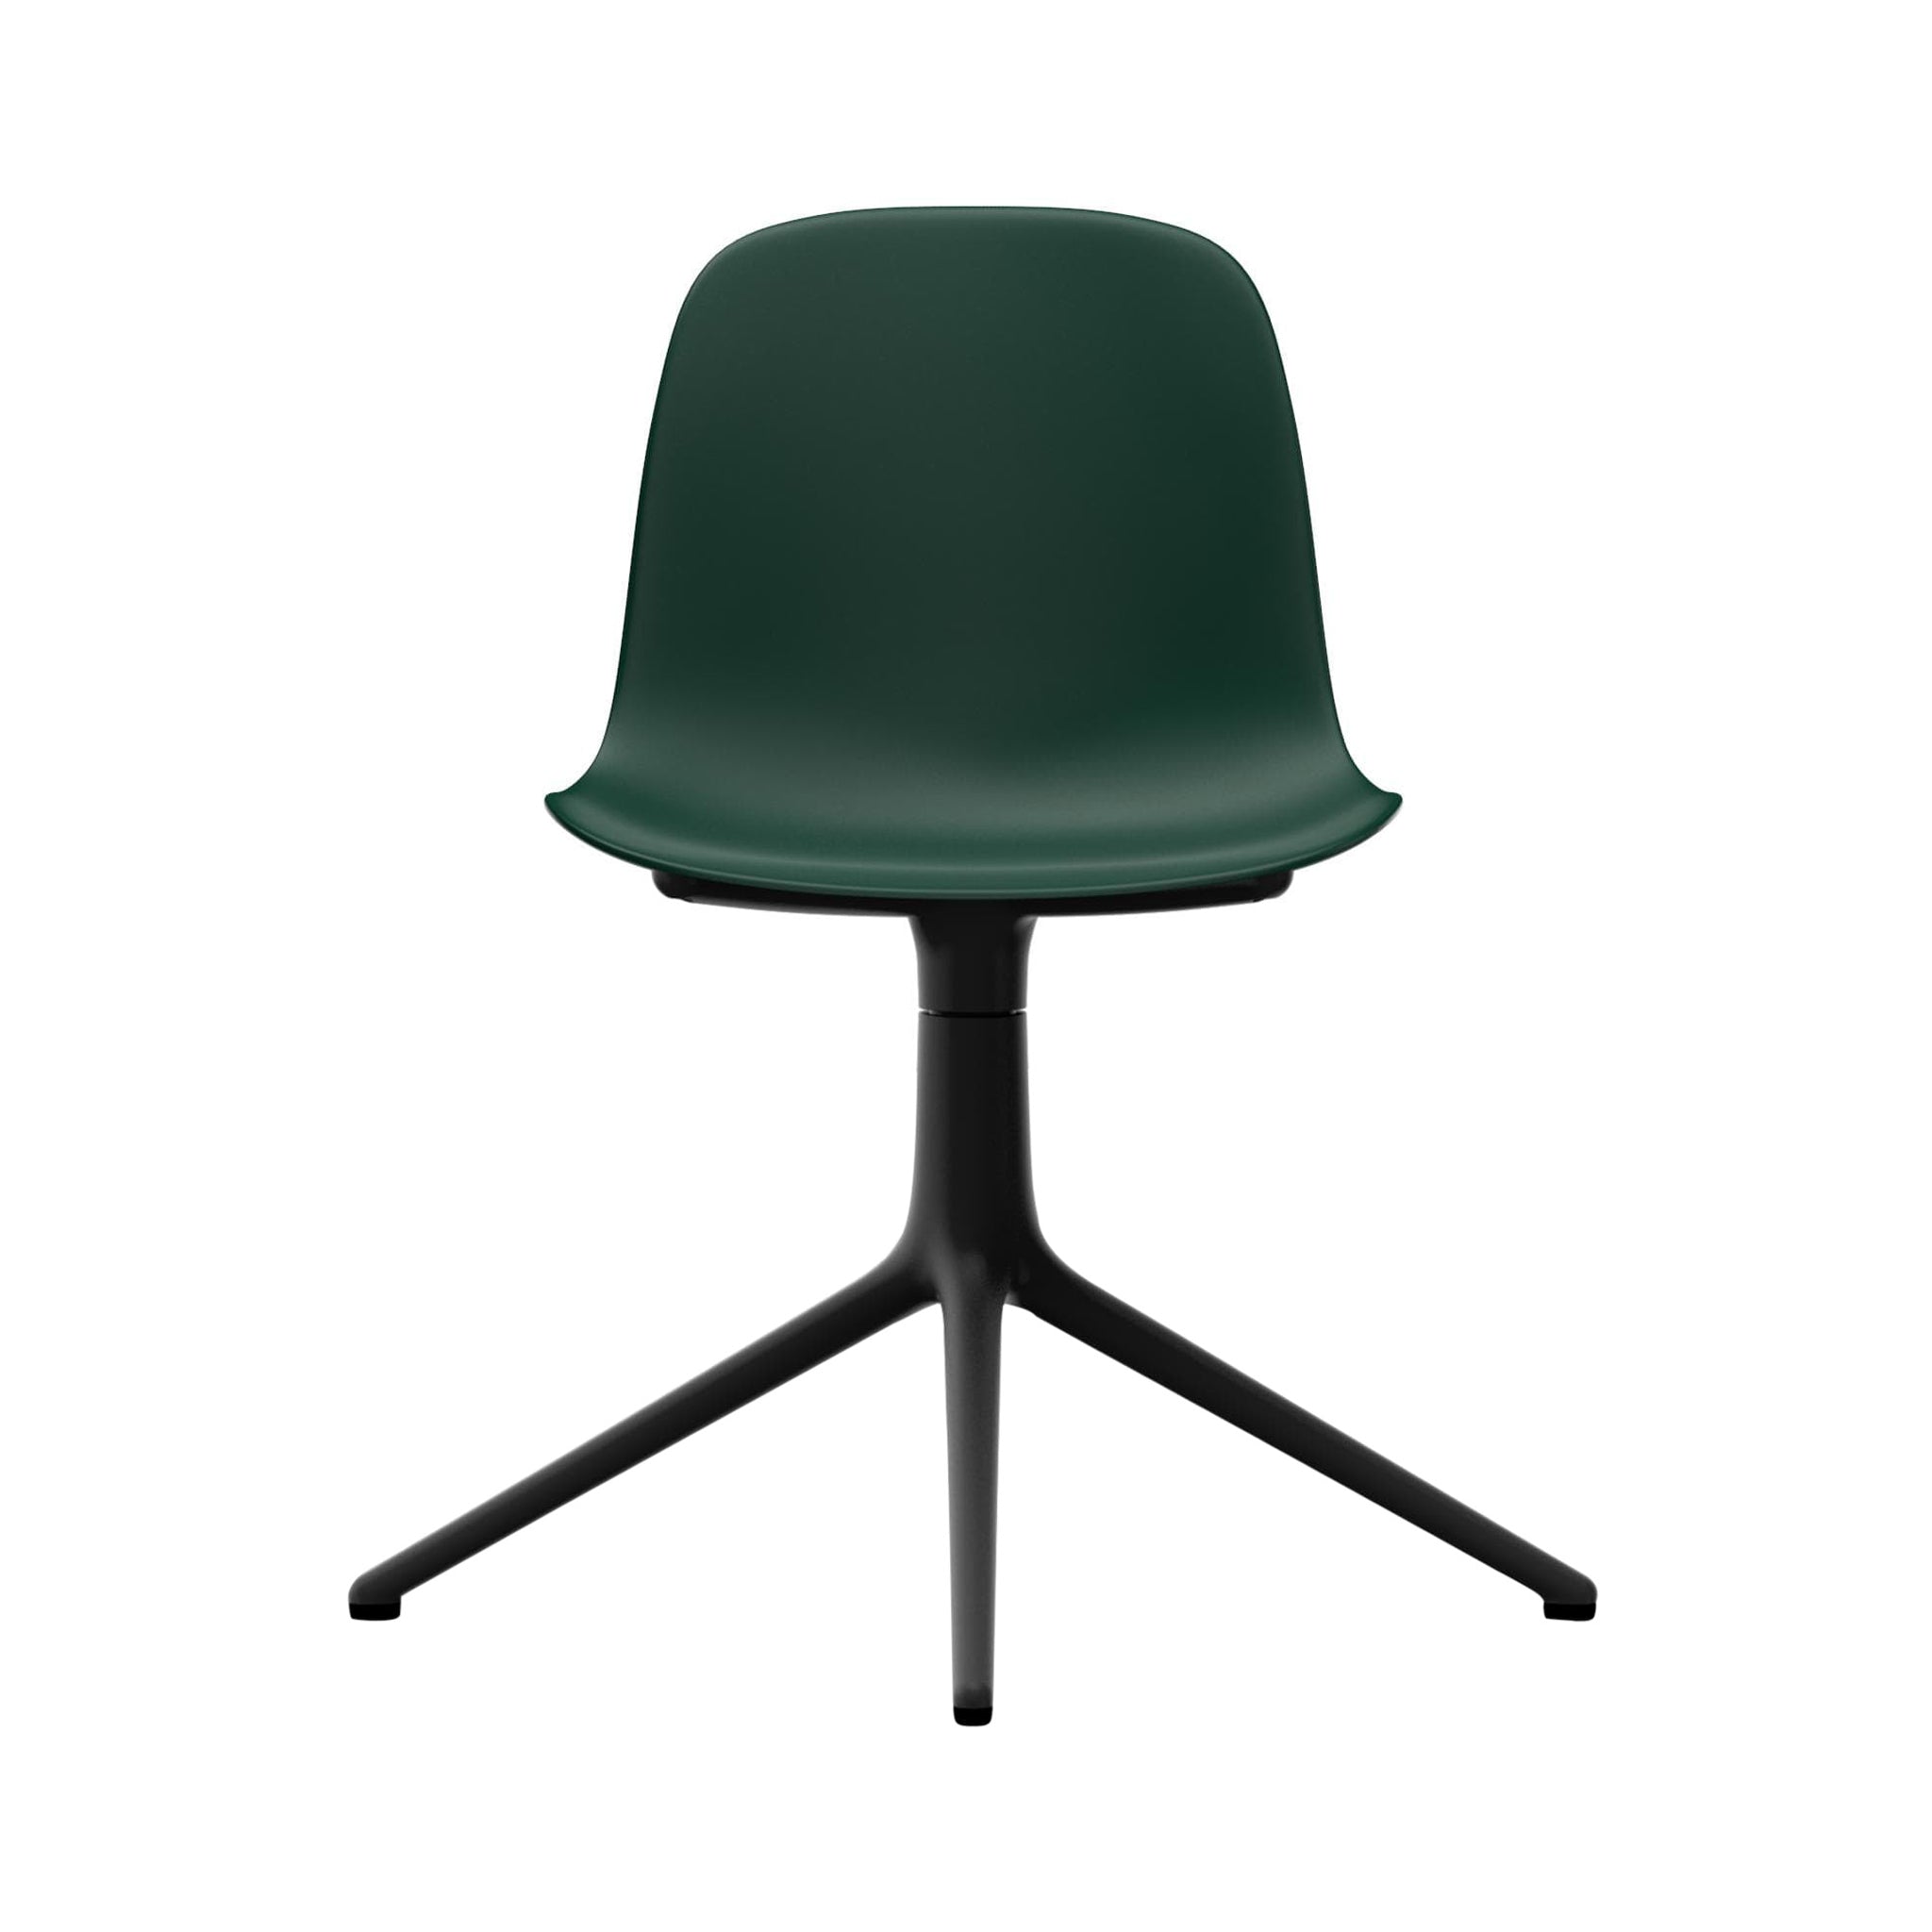 Form Chair: Swivel + Green + Black Aluminum + Without Casters